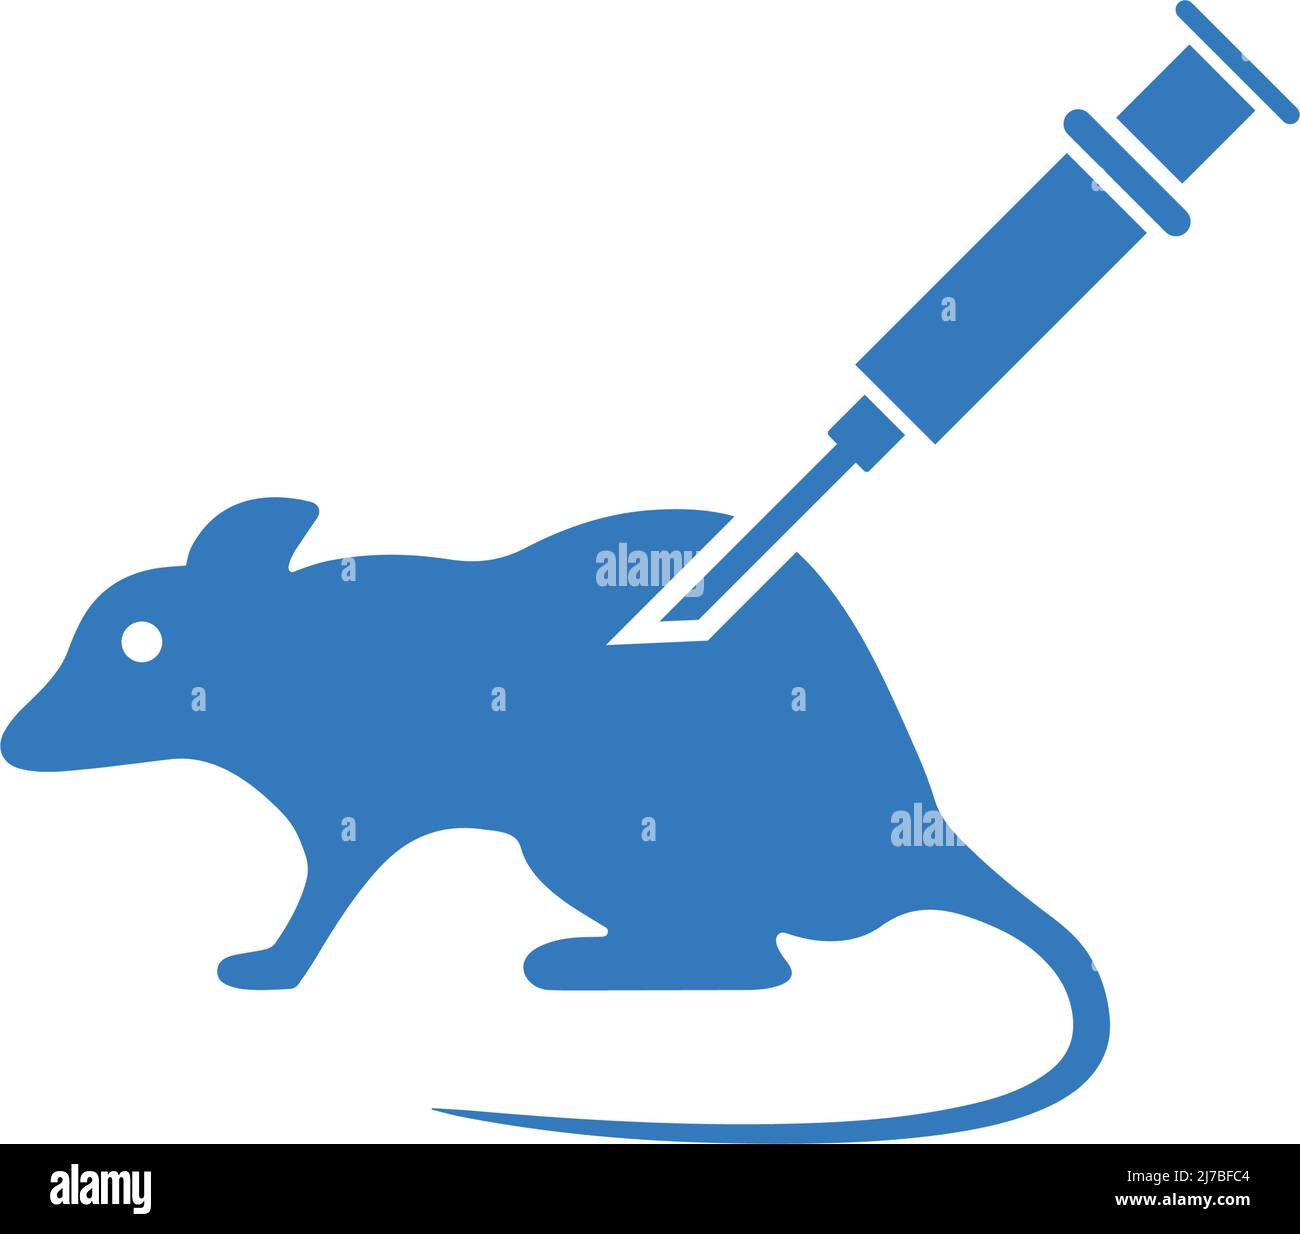 Experimental Laboratory White Mouse In A Cage Flat Vector Illustration On  Blue Background Stock Illustration - Download Image Now - iStock